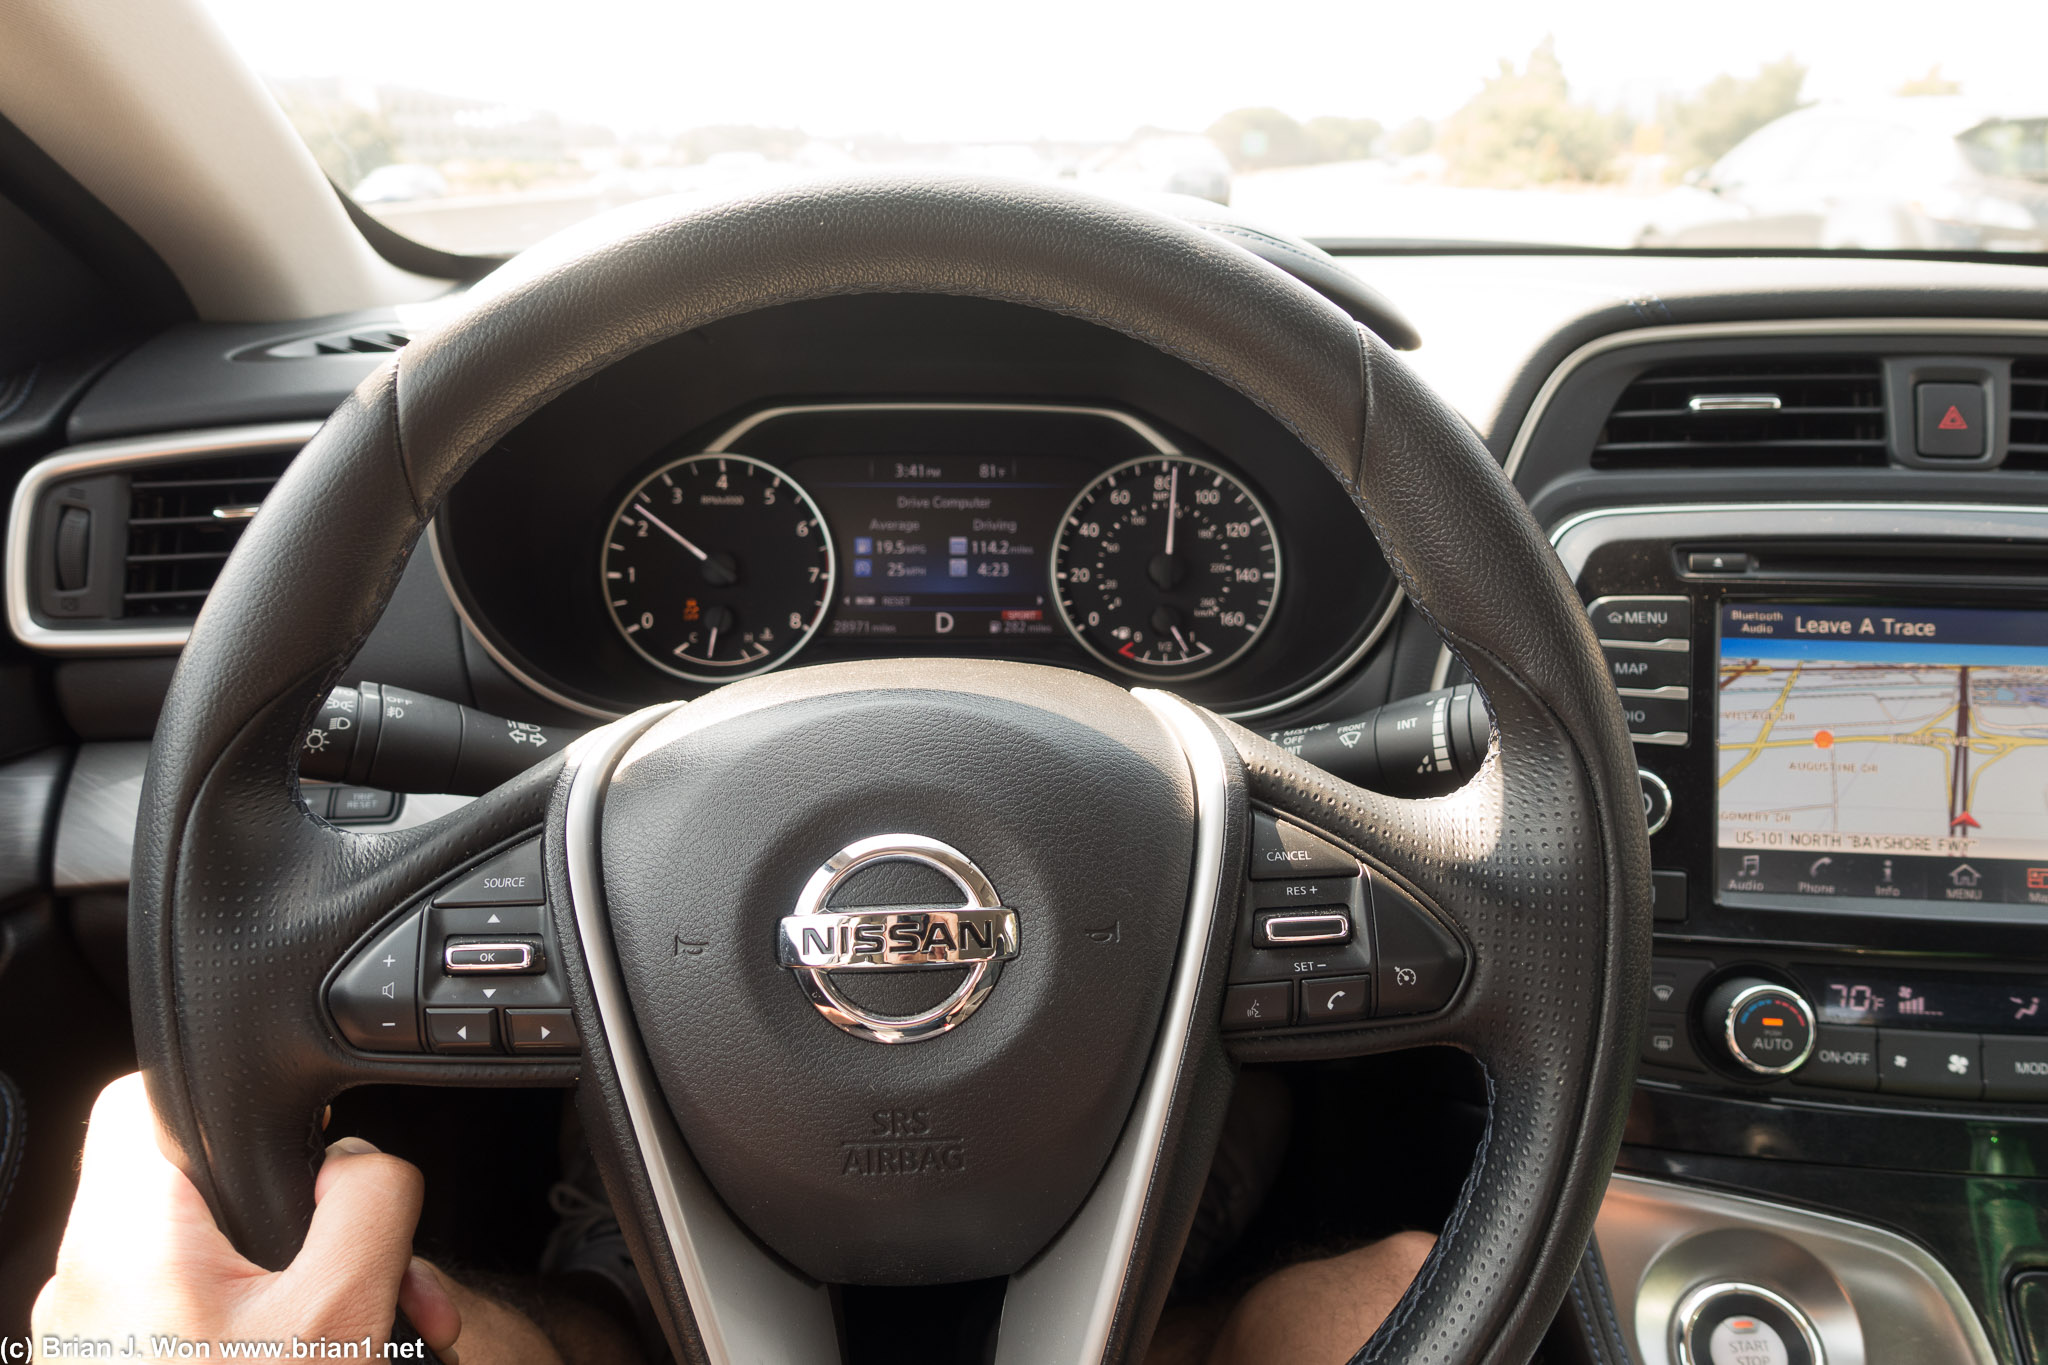 Nissan's steering wheel button layout could be better. And the navigation is dated.